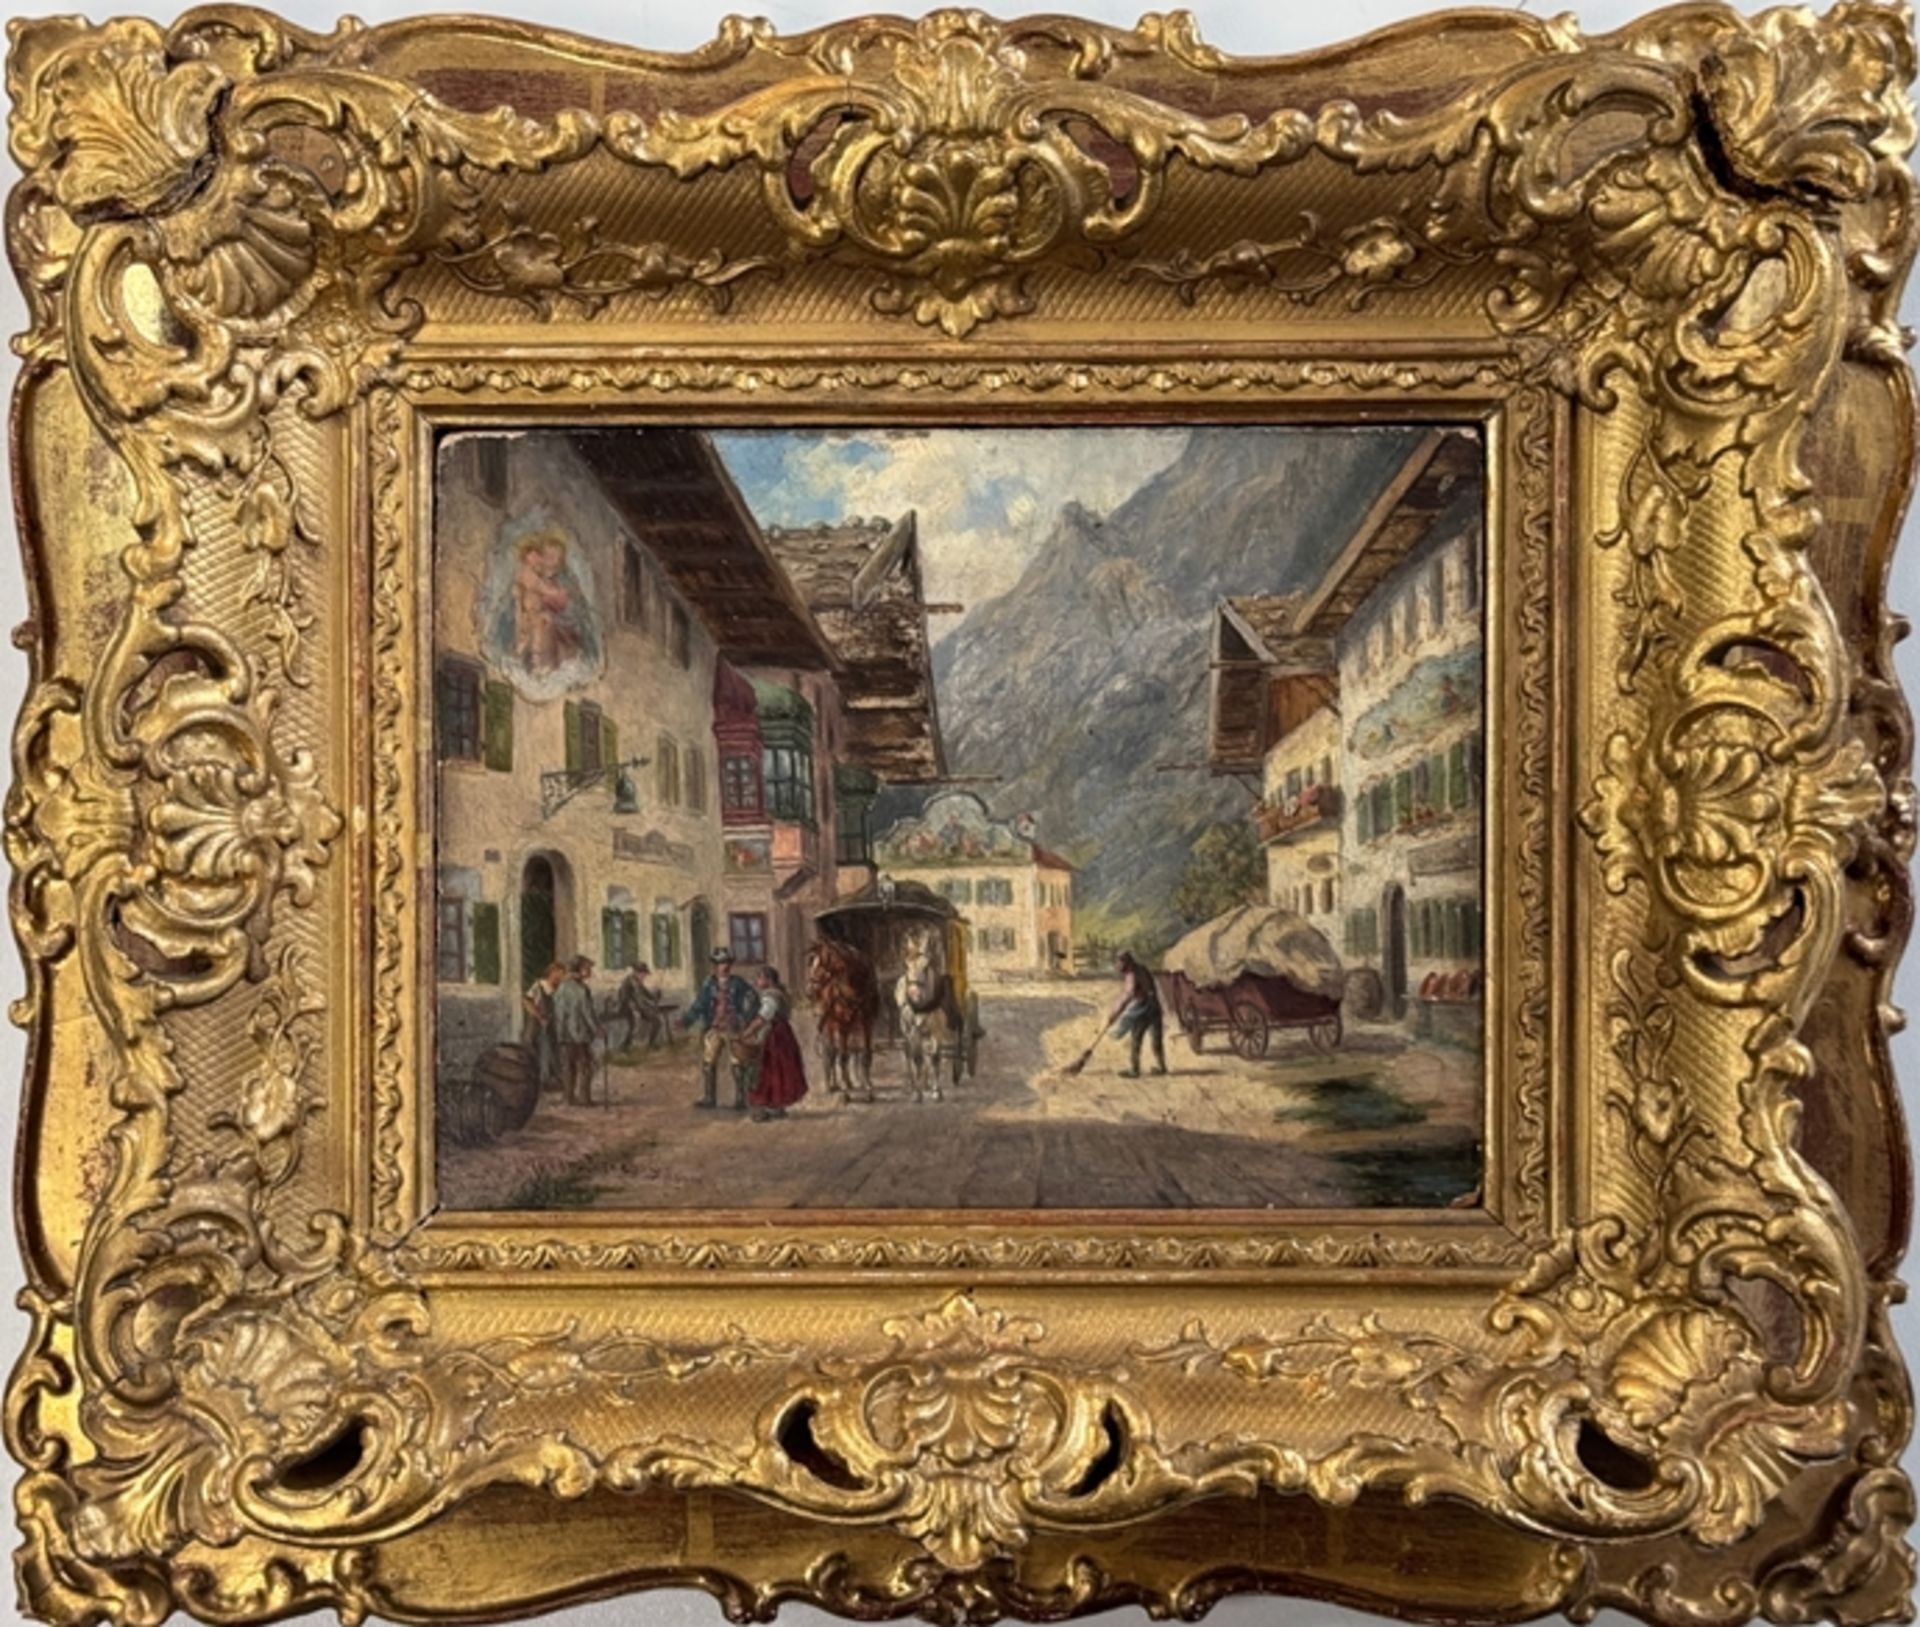 Müller-Cornelius, Ludwig (1864 - 1946 Munich) "Mountain village", view of an idyllic village in the - Image 2 of 5